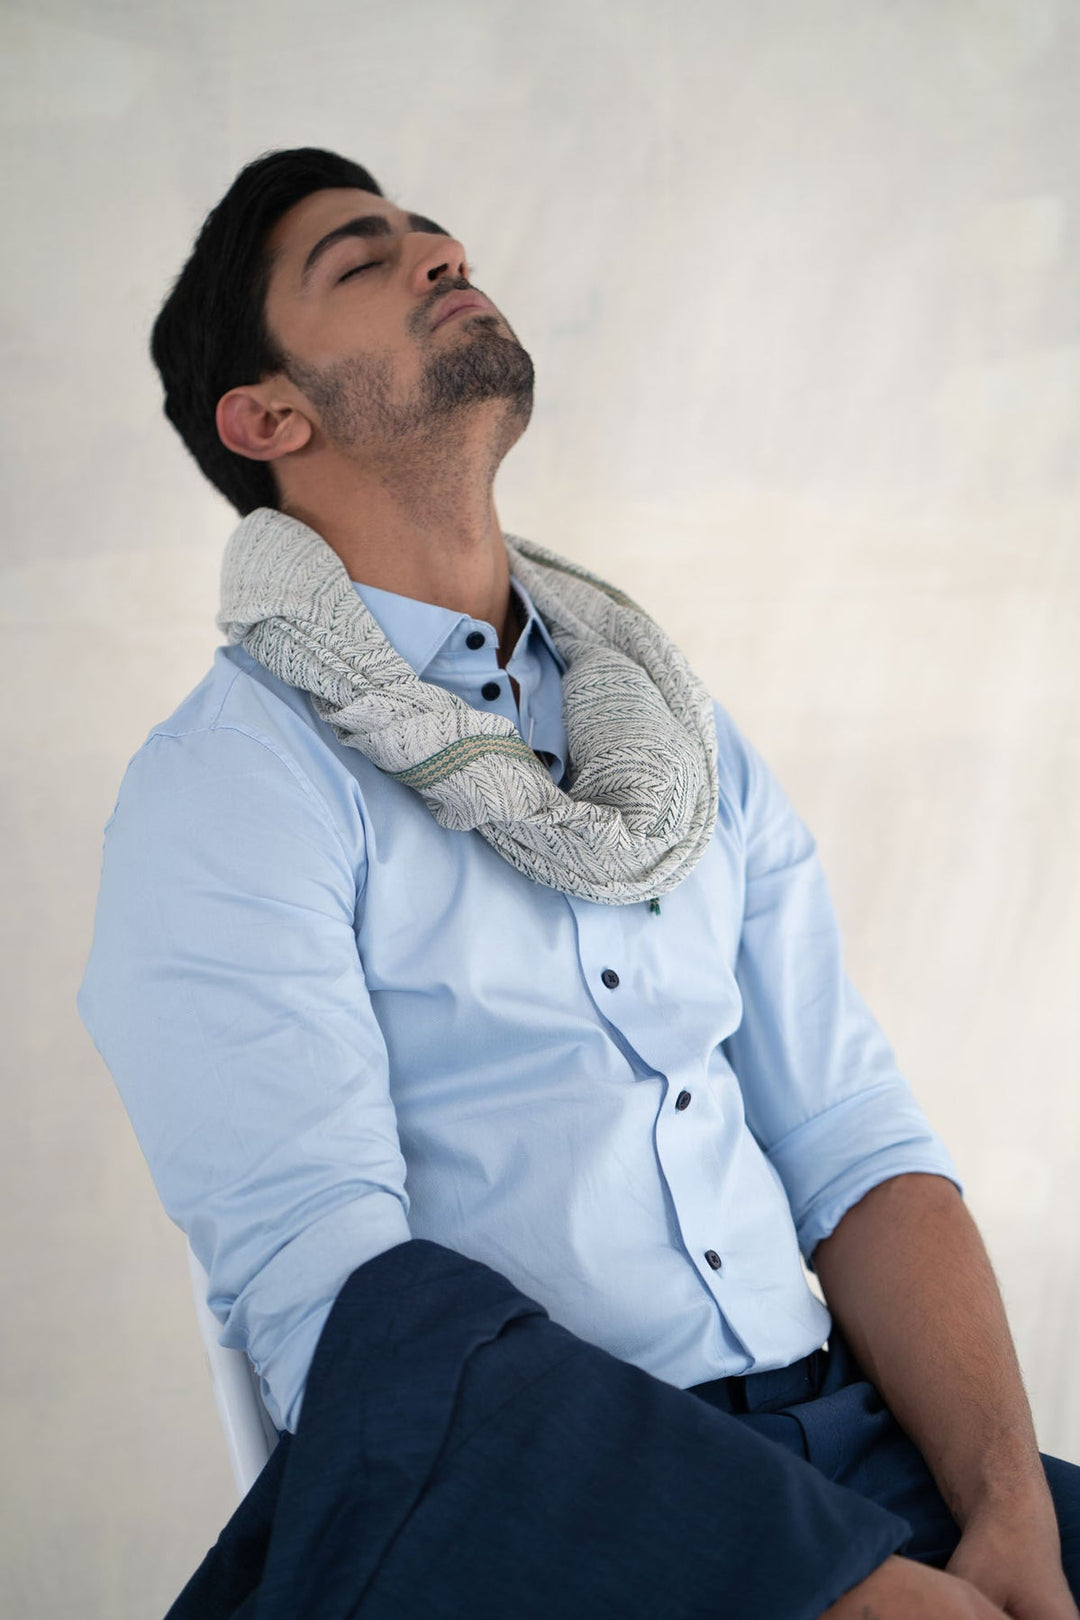 Striped Linen Stole with Block Print Borders | Enfys Handwoven Linen Stole - Gray & White